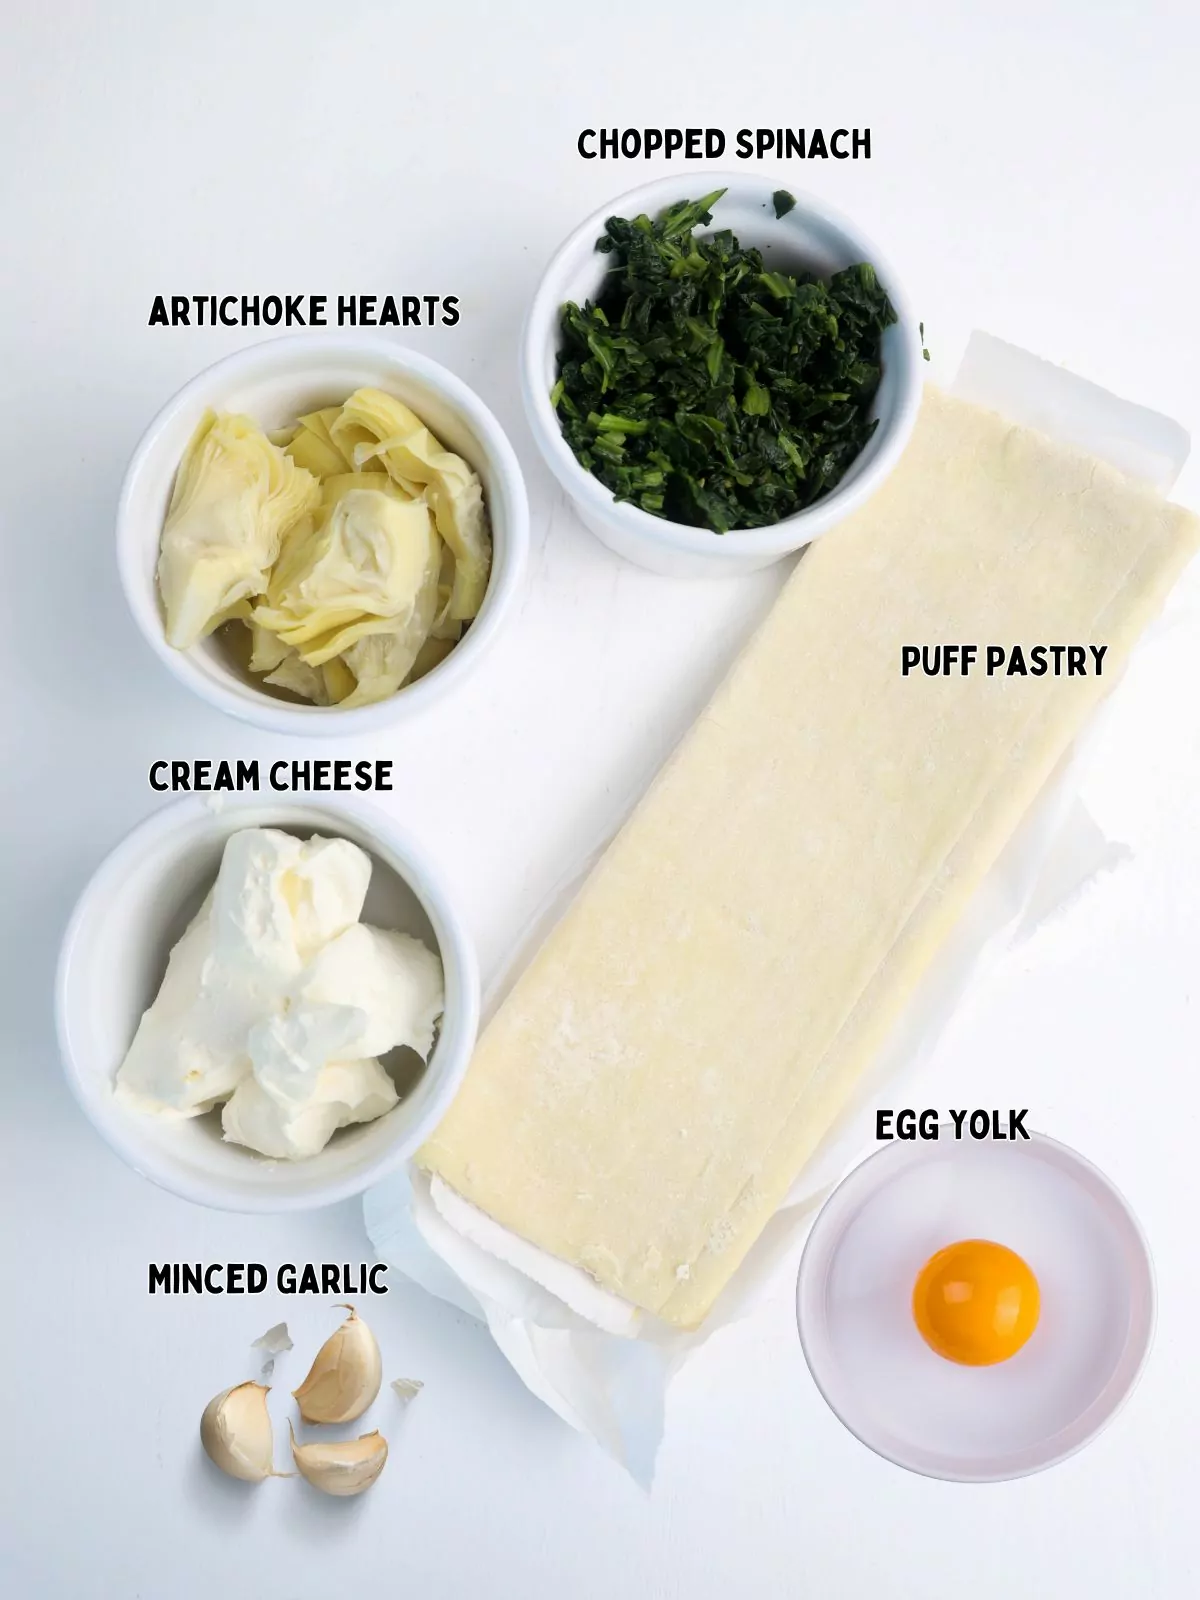 ingredients for spinach artichoke dip with puff pastry sheet.